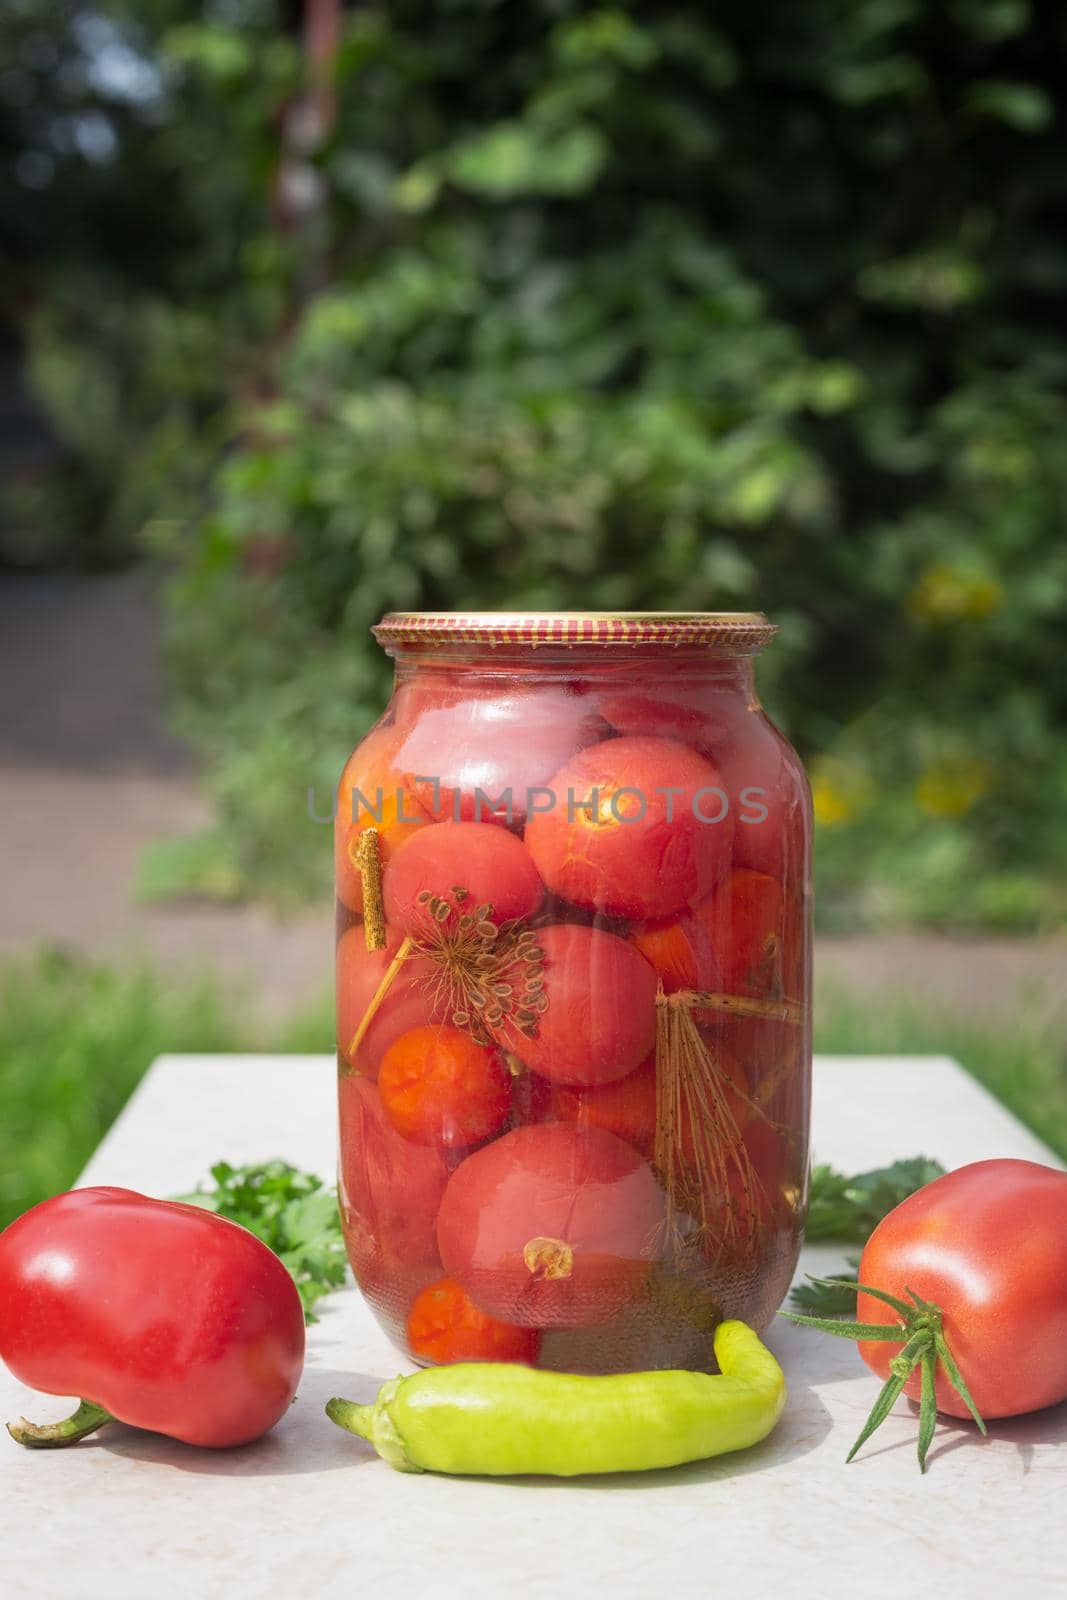 Canned tomatoes in a large glass jar. by georgina198